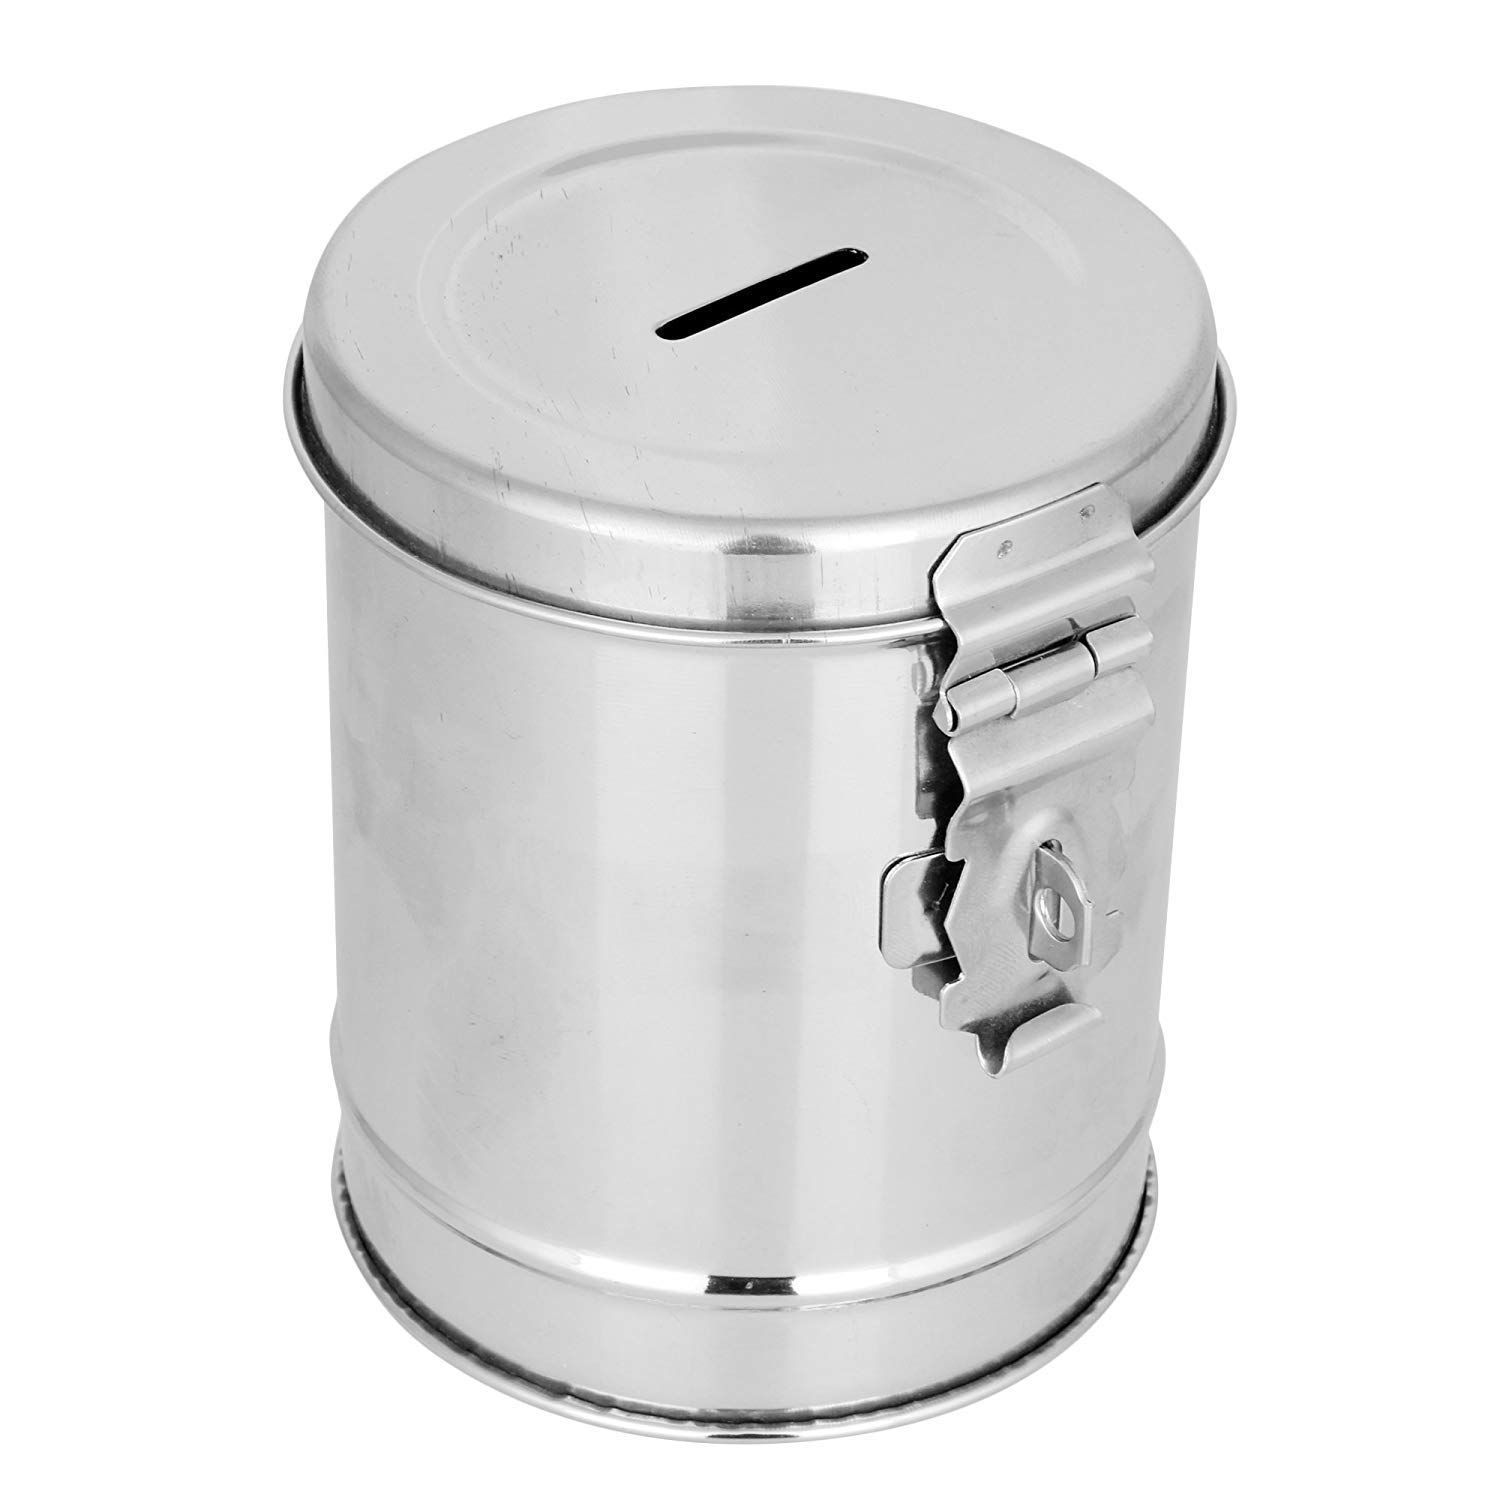     			100% Stainless Steel Round Shape Piggy Bank | Money Bank Container for Kids